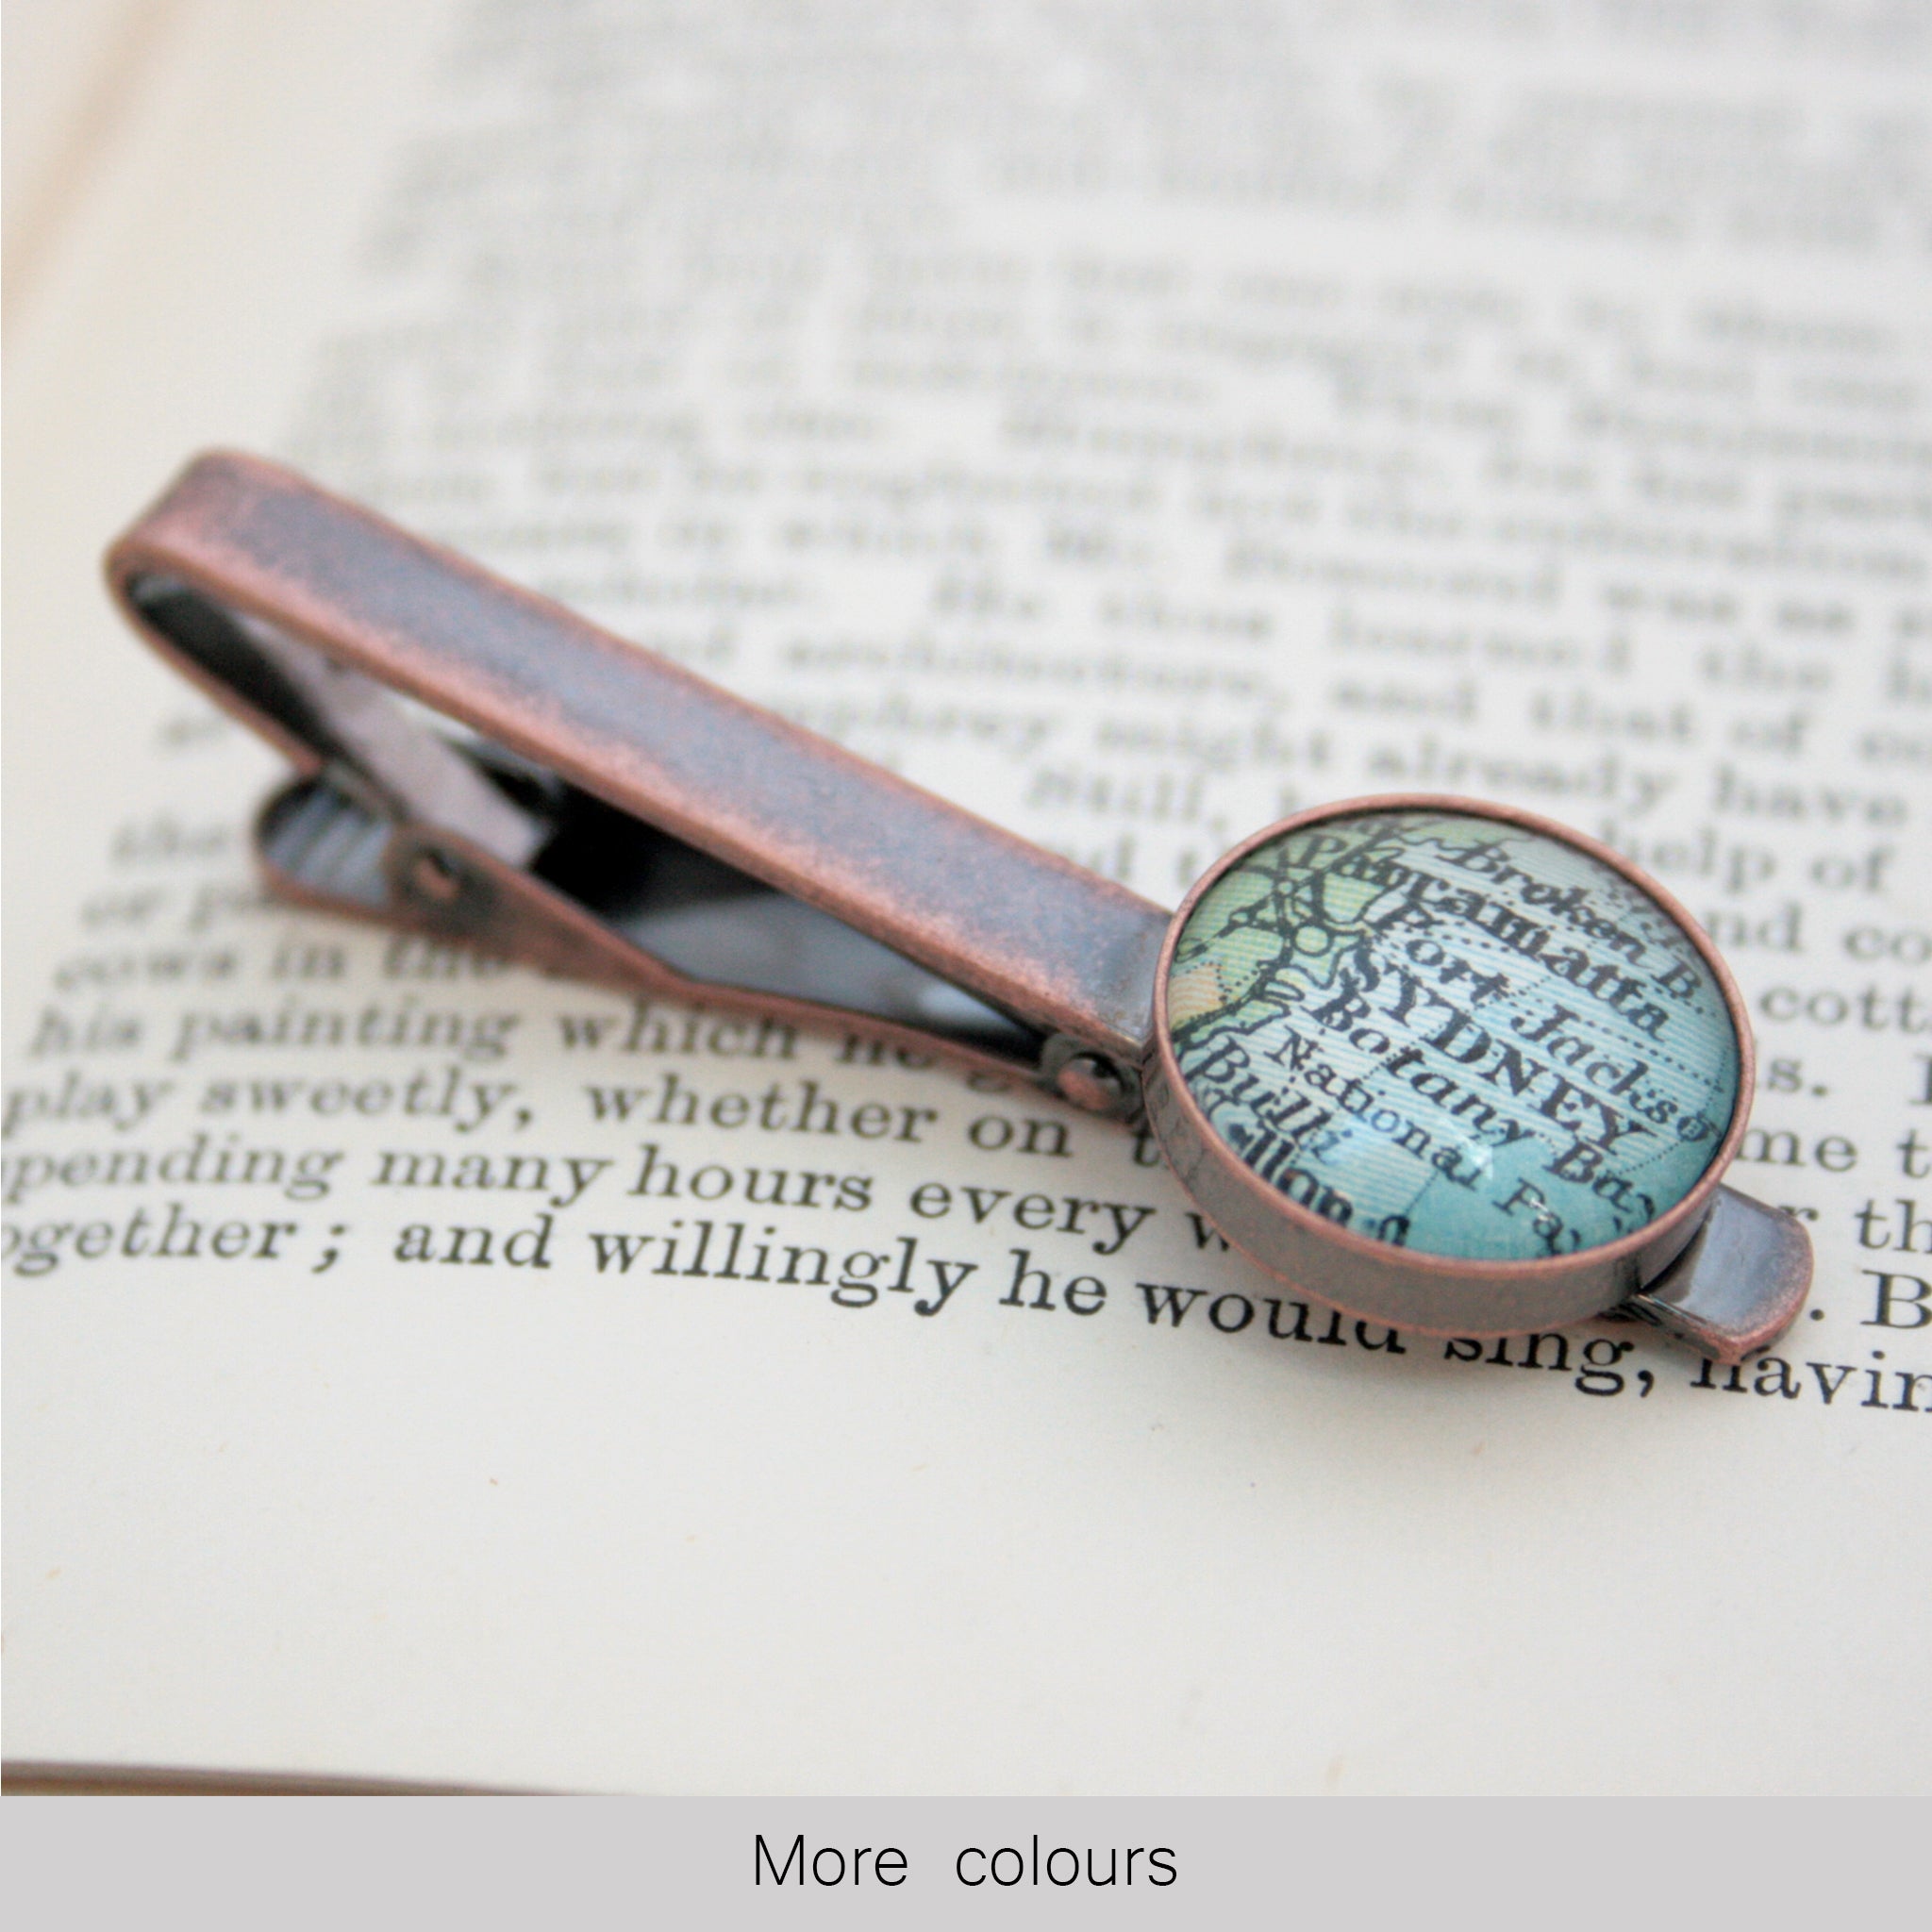 Personalised Tie Clip in copper color featuring map of Sydney